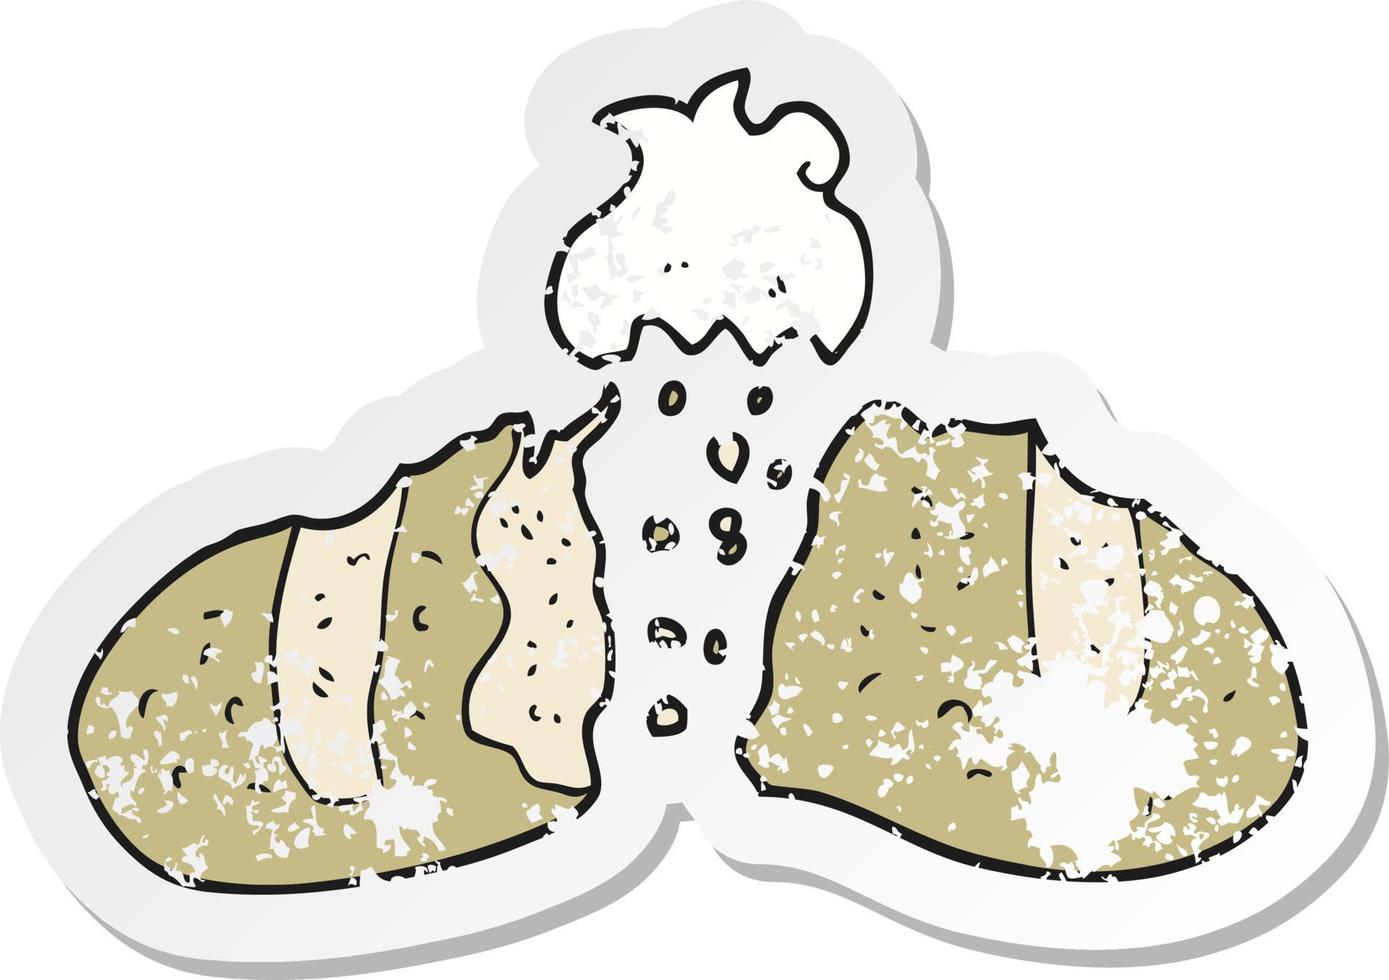 retro distressed sticker of a cartoon loaf of bread vector